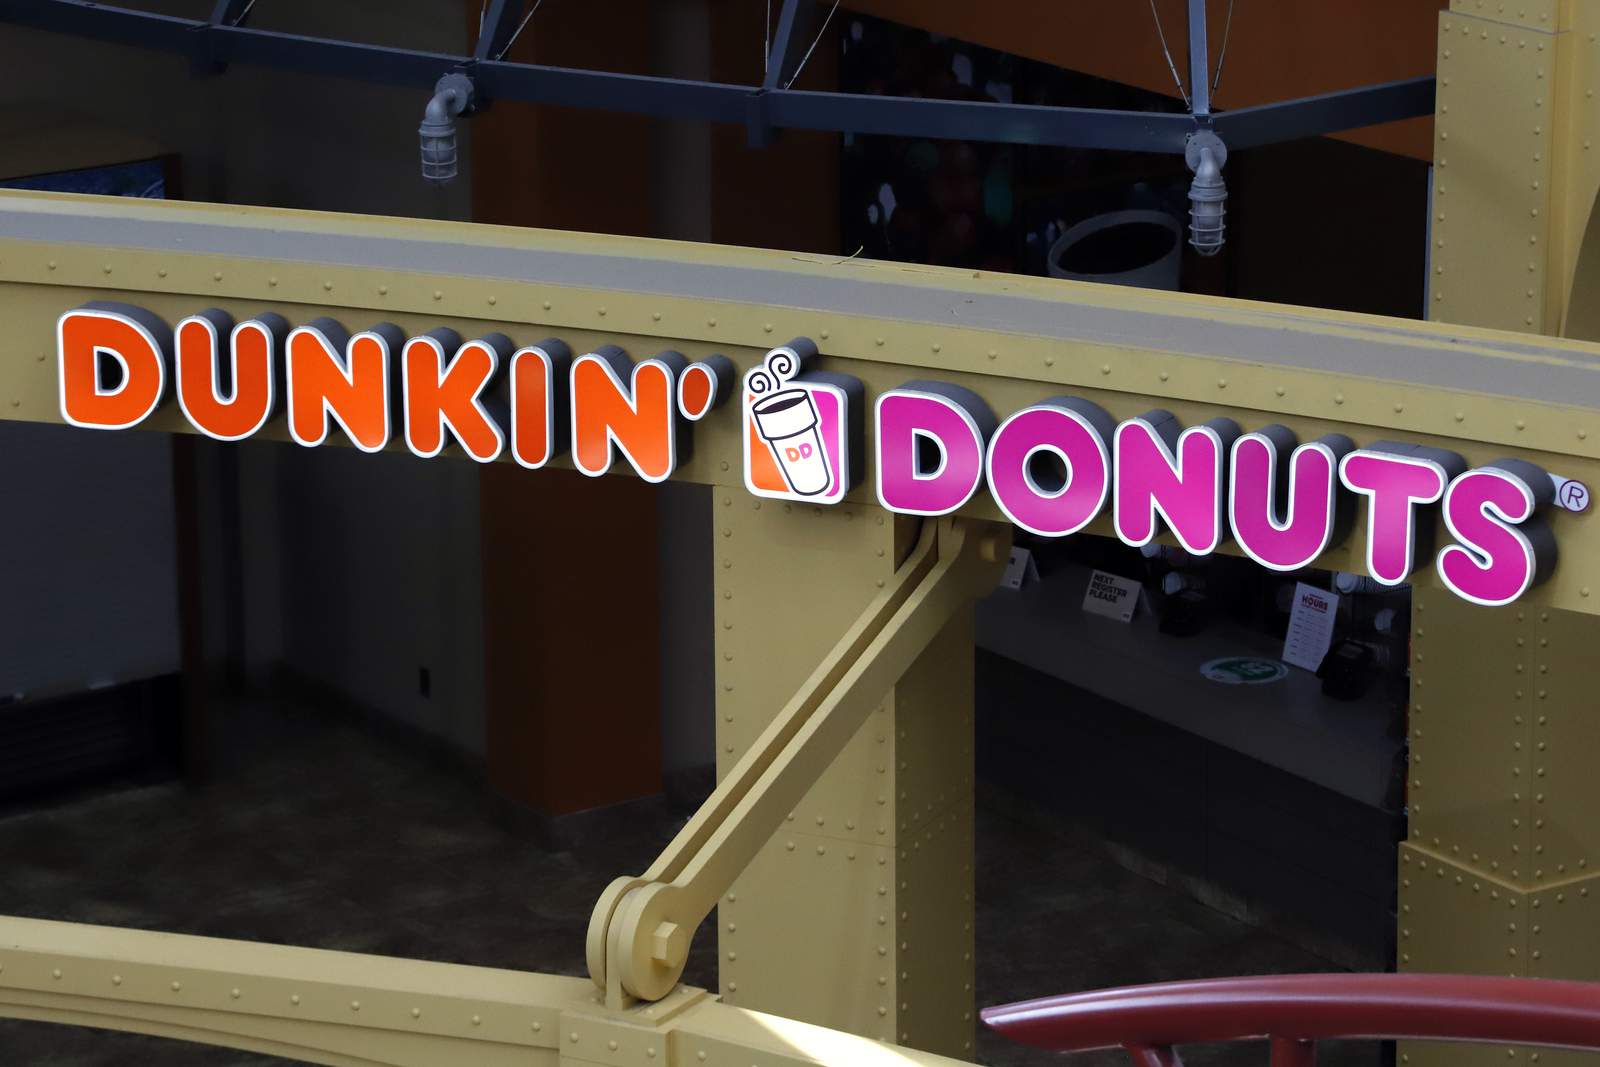 Dunkin' shares hit all-time high after holding buyout talks